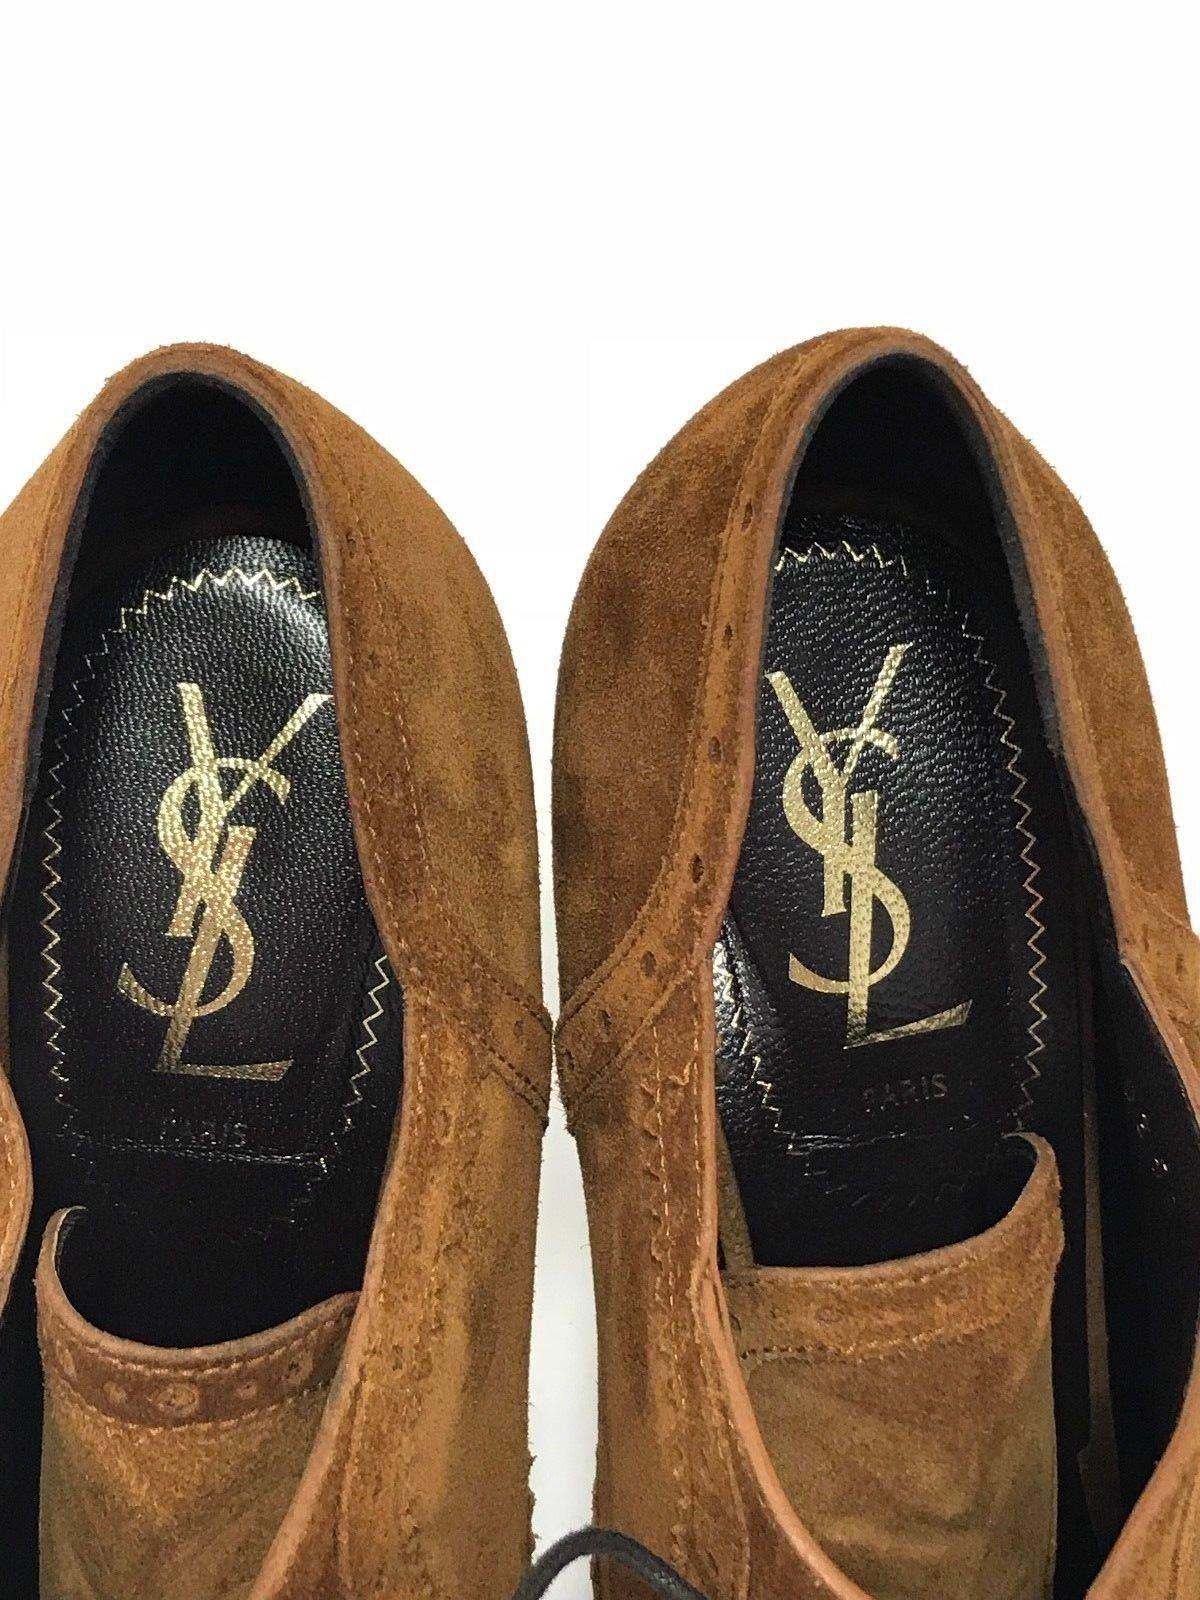 YSL Stiletto Tribute Light Suede Lace Up Heels  In Excellent Condition For Sale In Saint Charles, IL